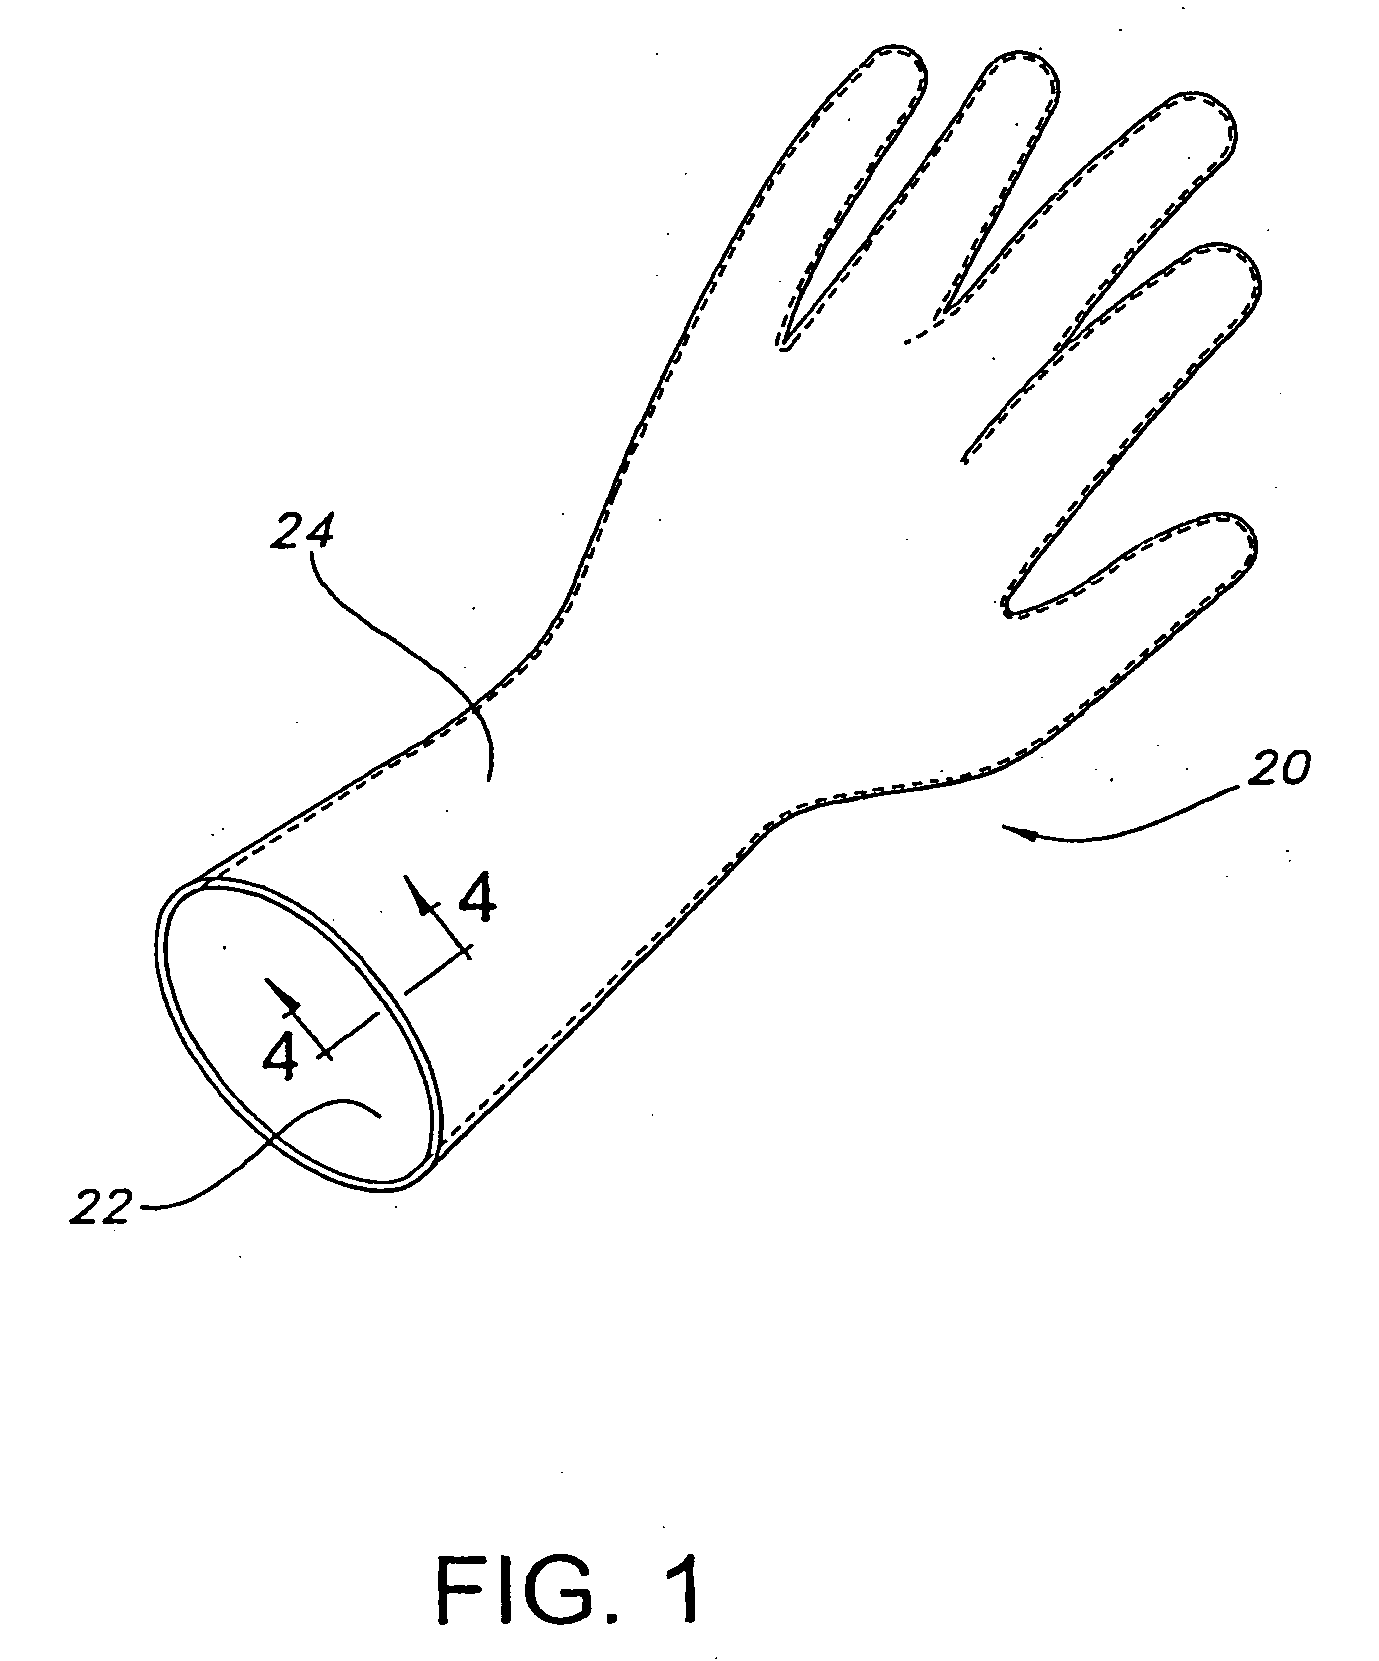 Gloves with hydrogel coating for damp hand donning and method of making same